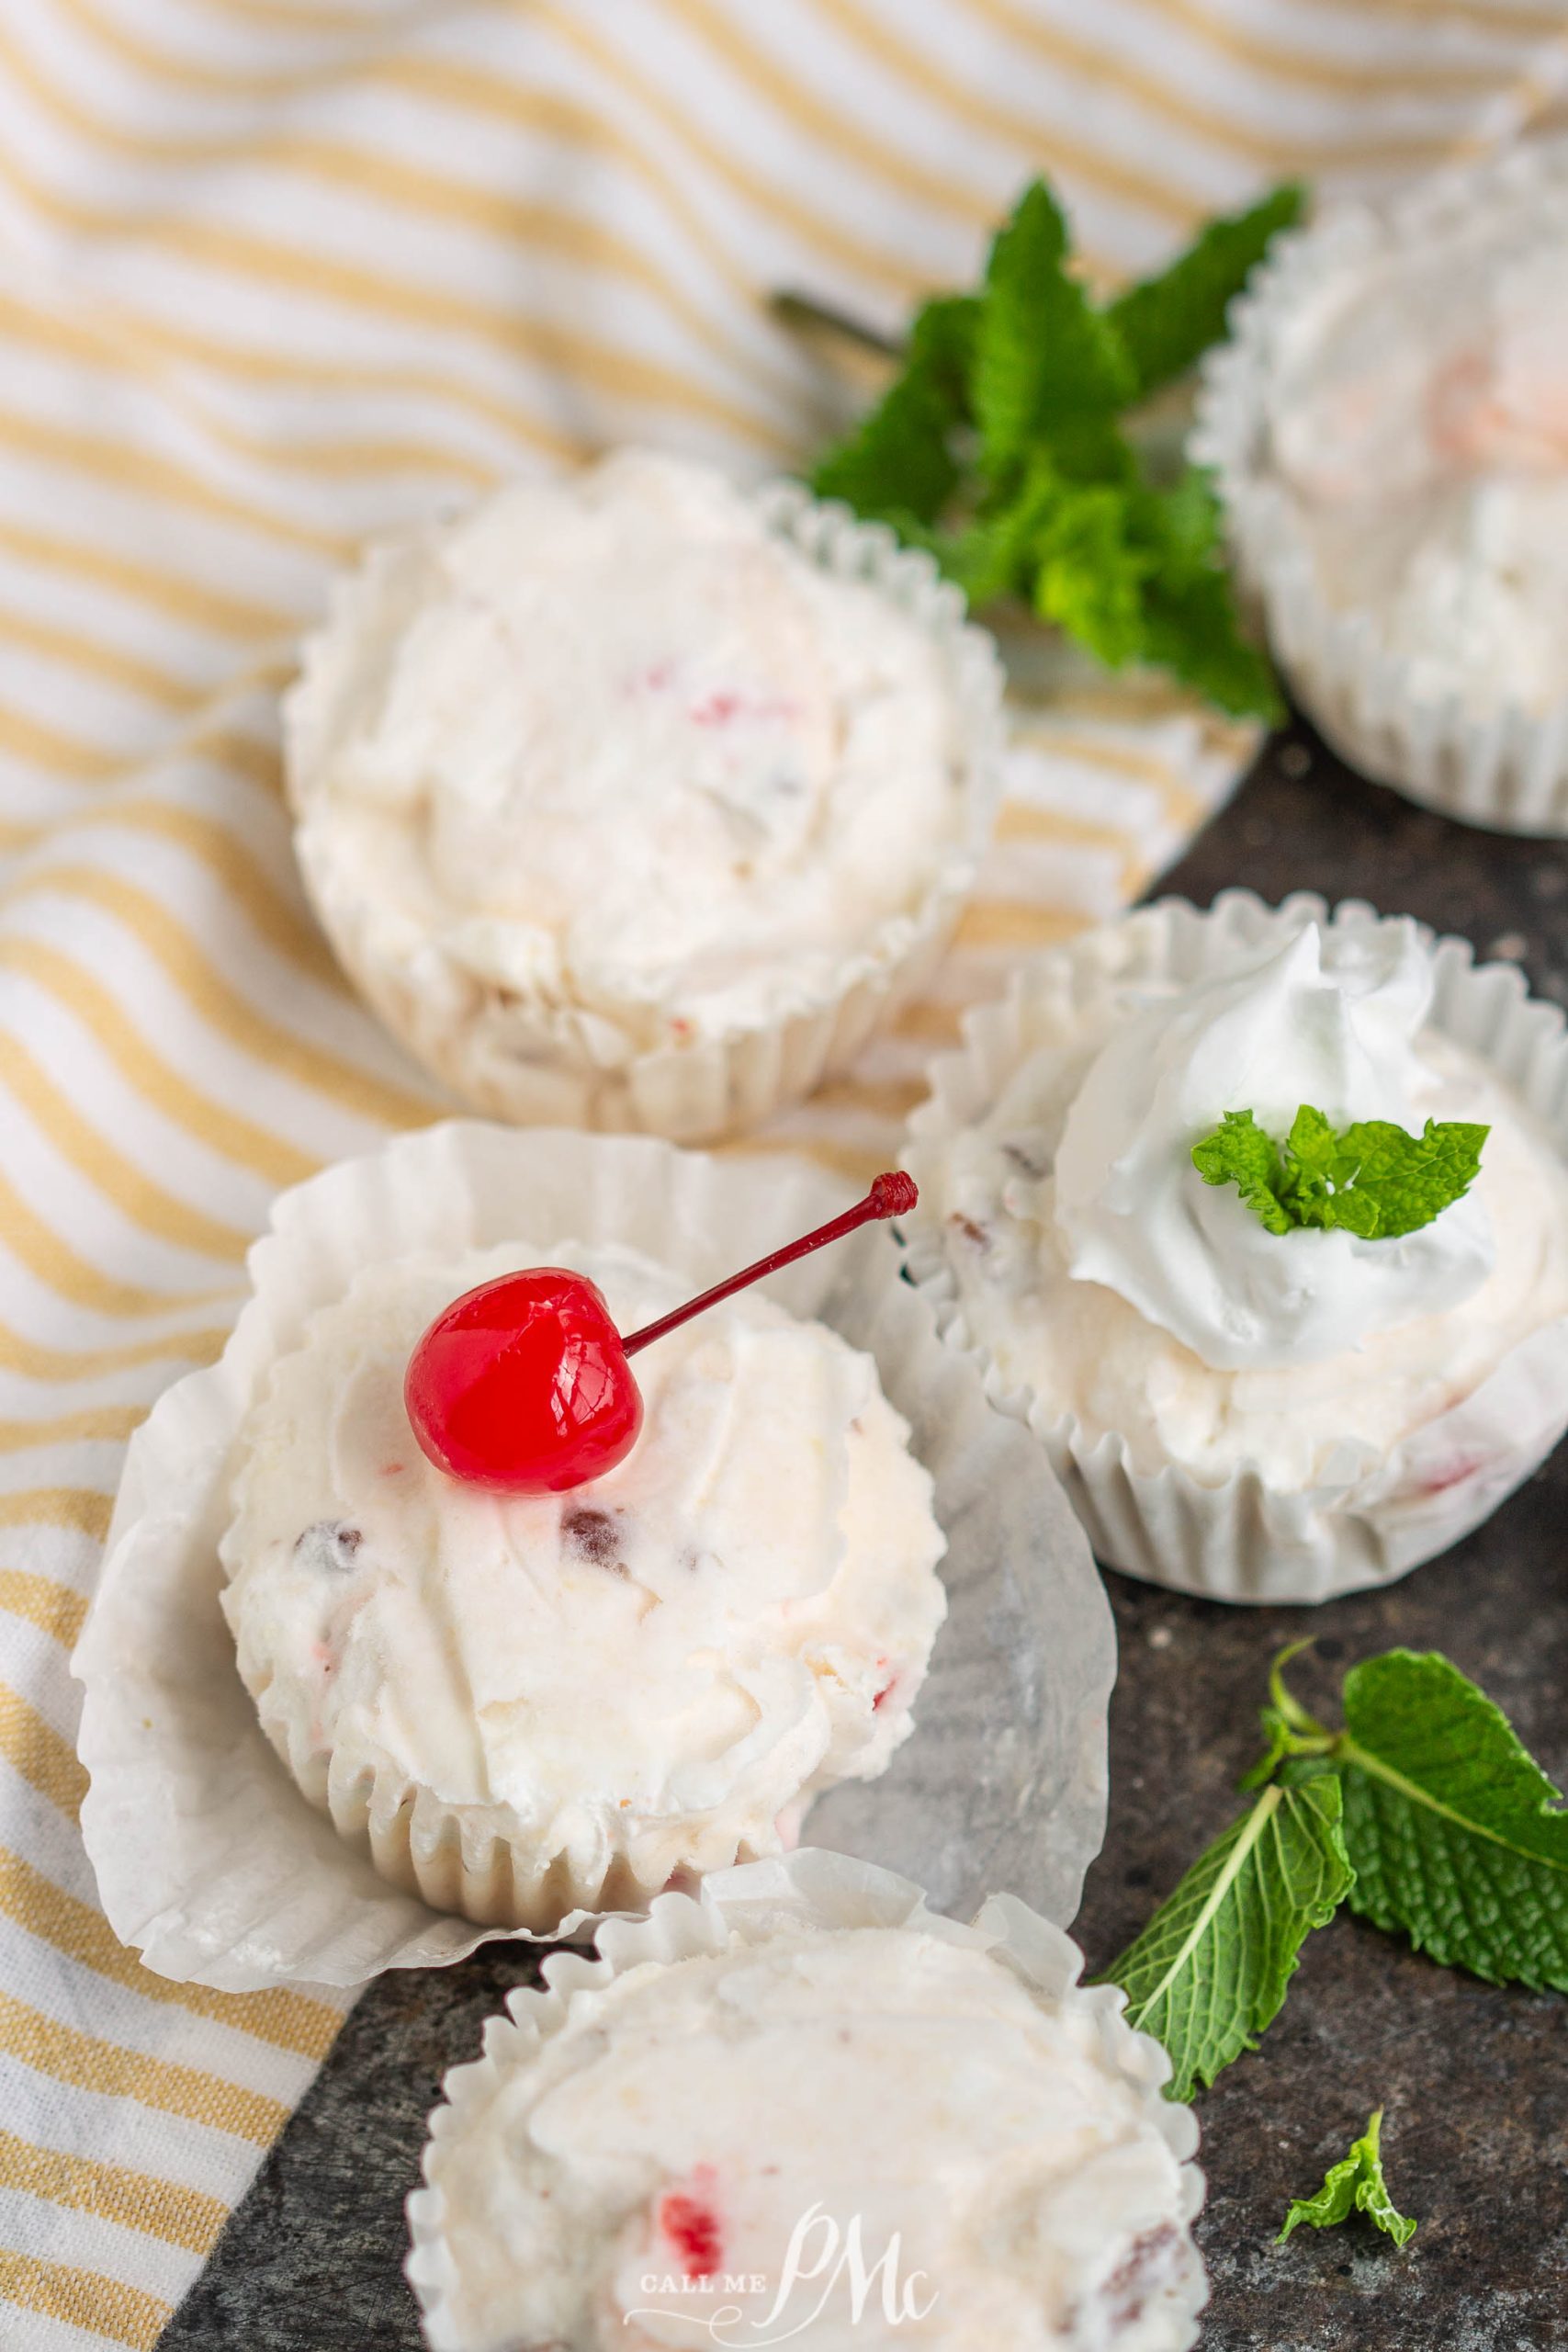 fruit salad cupcakes with cherries and mint leaves on a table.